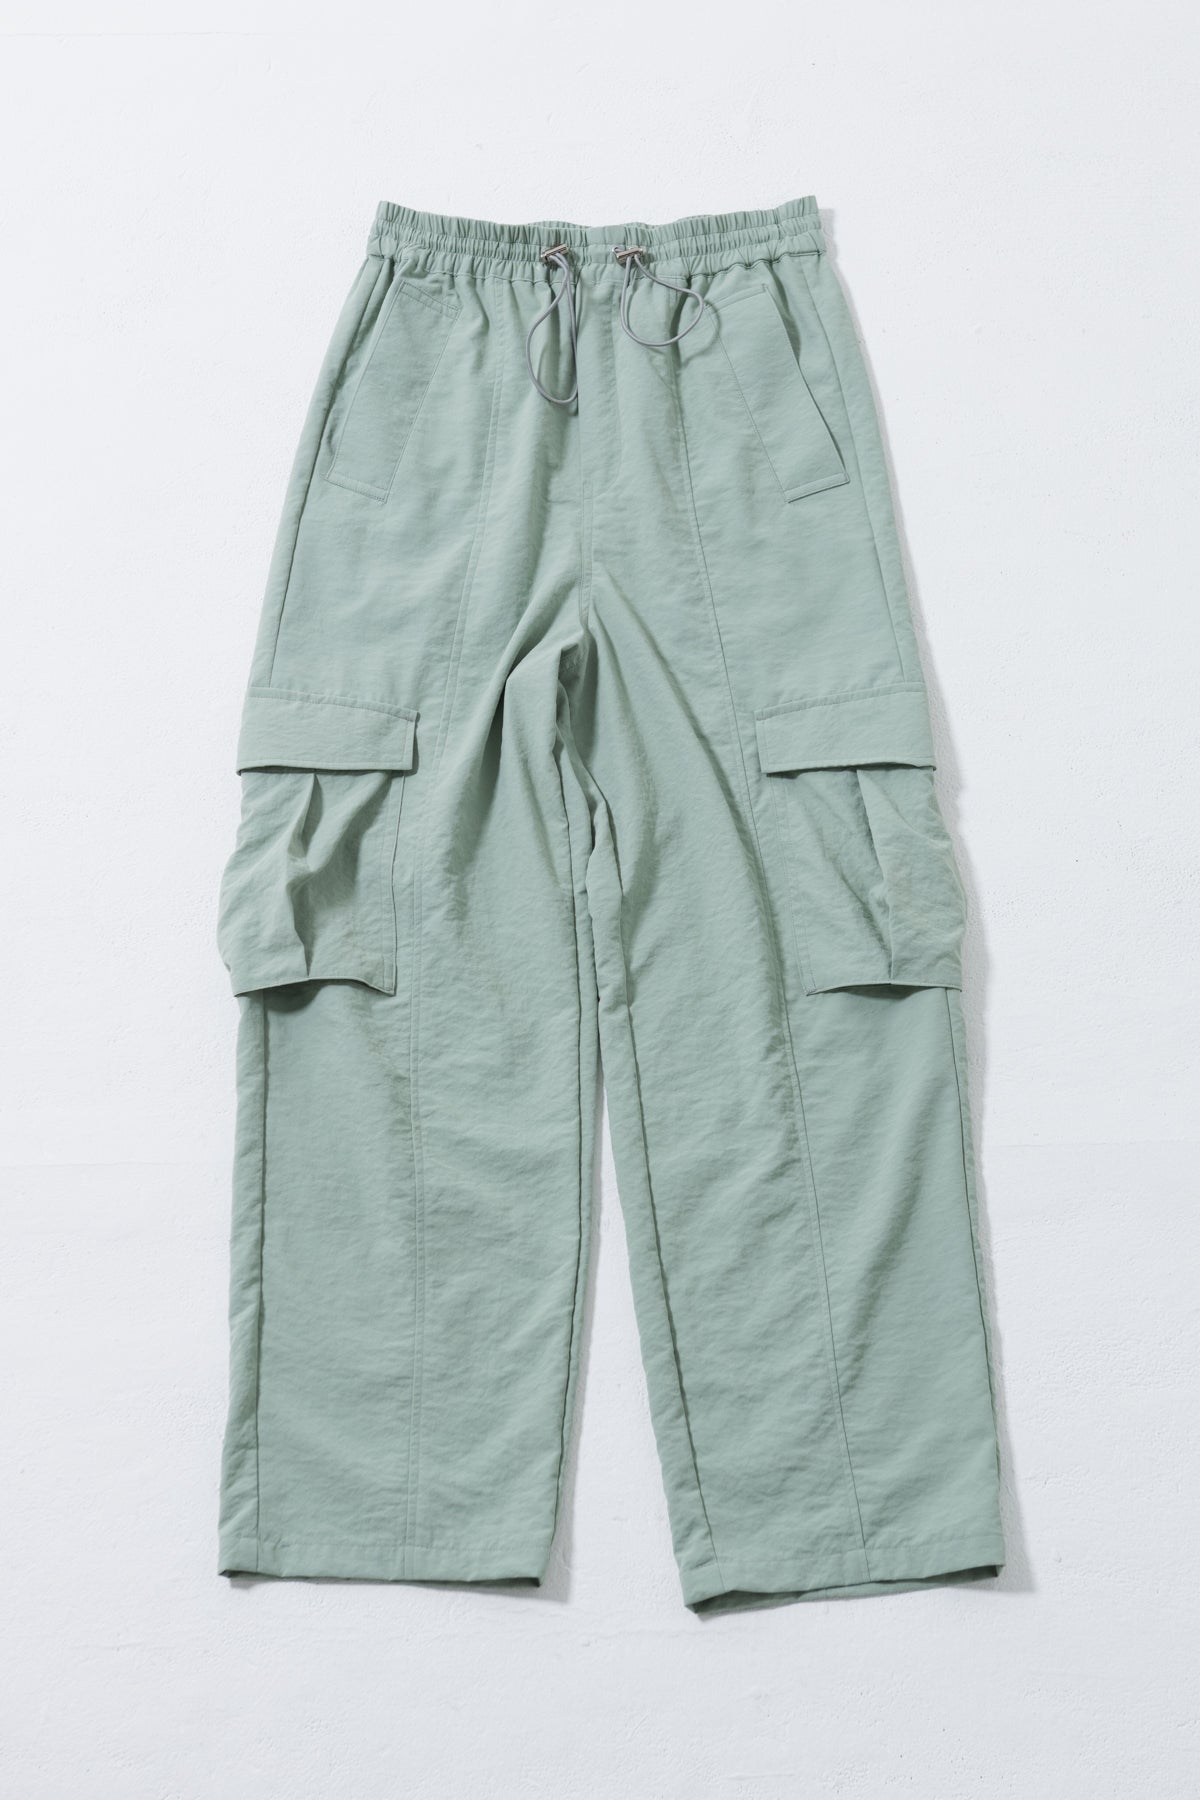 Clothing & Shoes - Bottoms - Pants - Mr. Max Hollywood Knit Soft